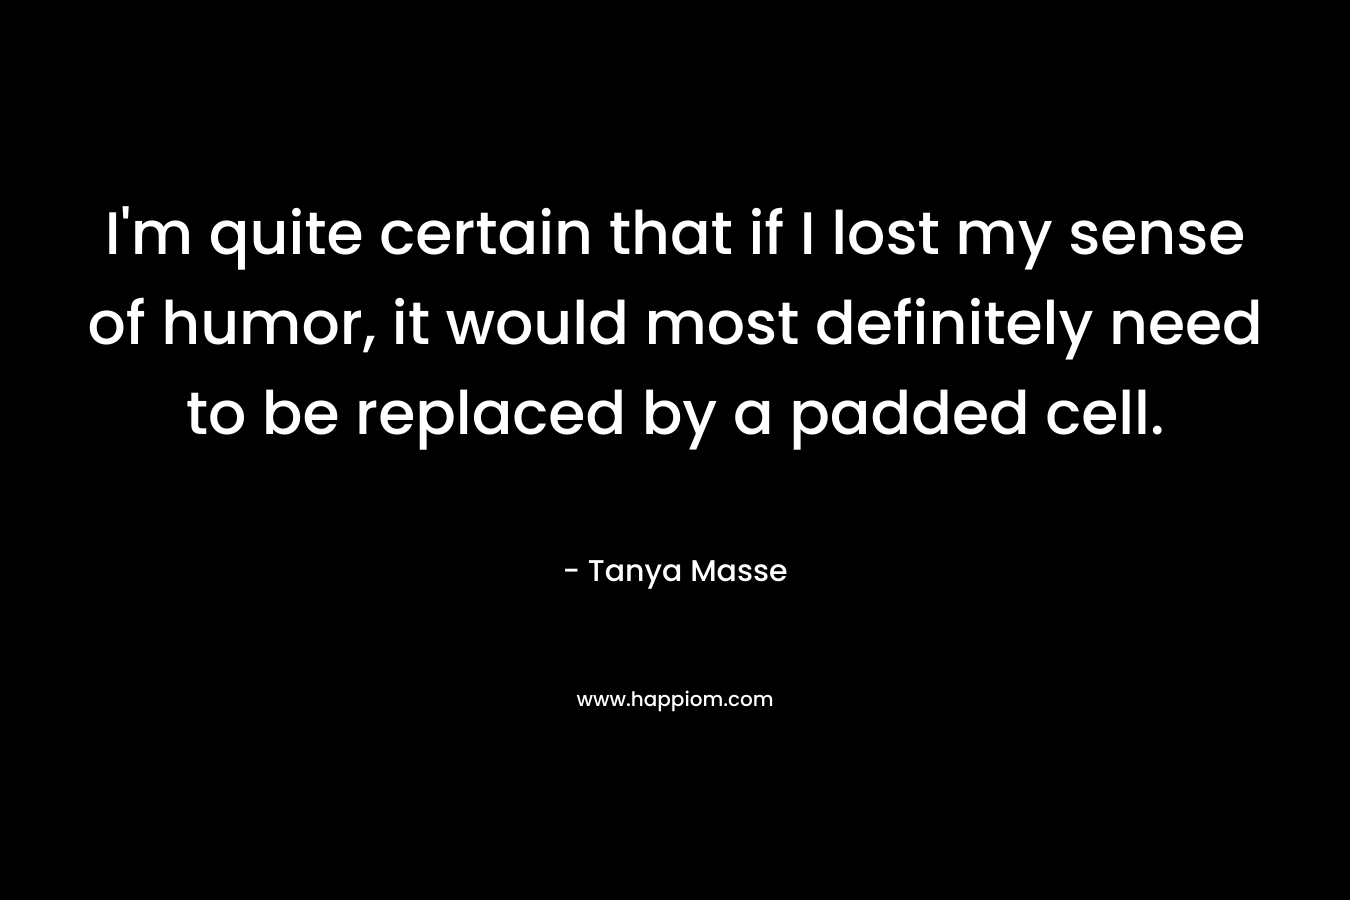 I’m quite certain that if I lost my sense of humor, it would most definitely need to be replaced by a padded cell. – Tanya Masse